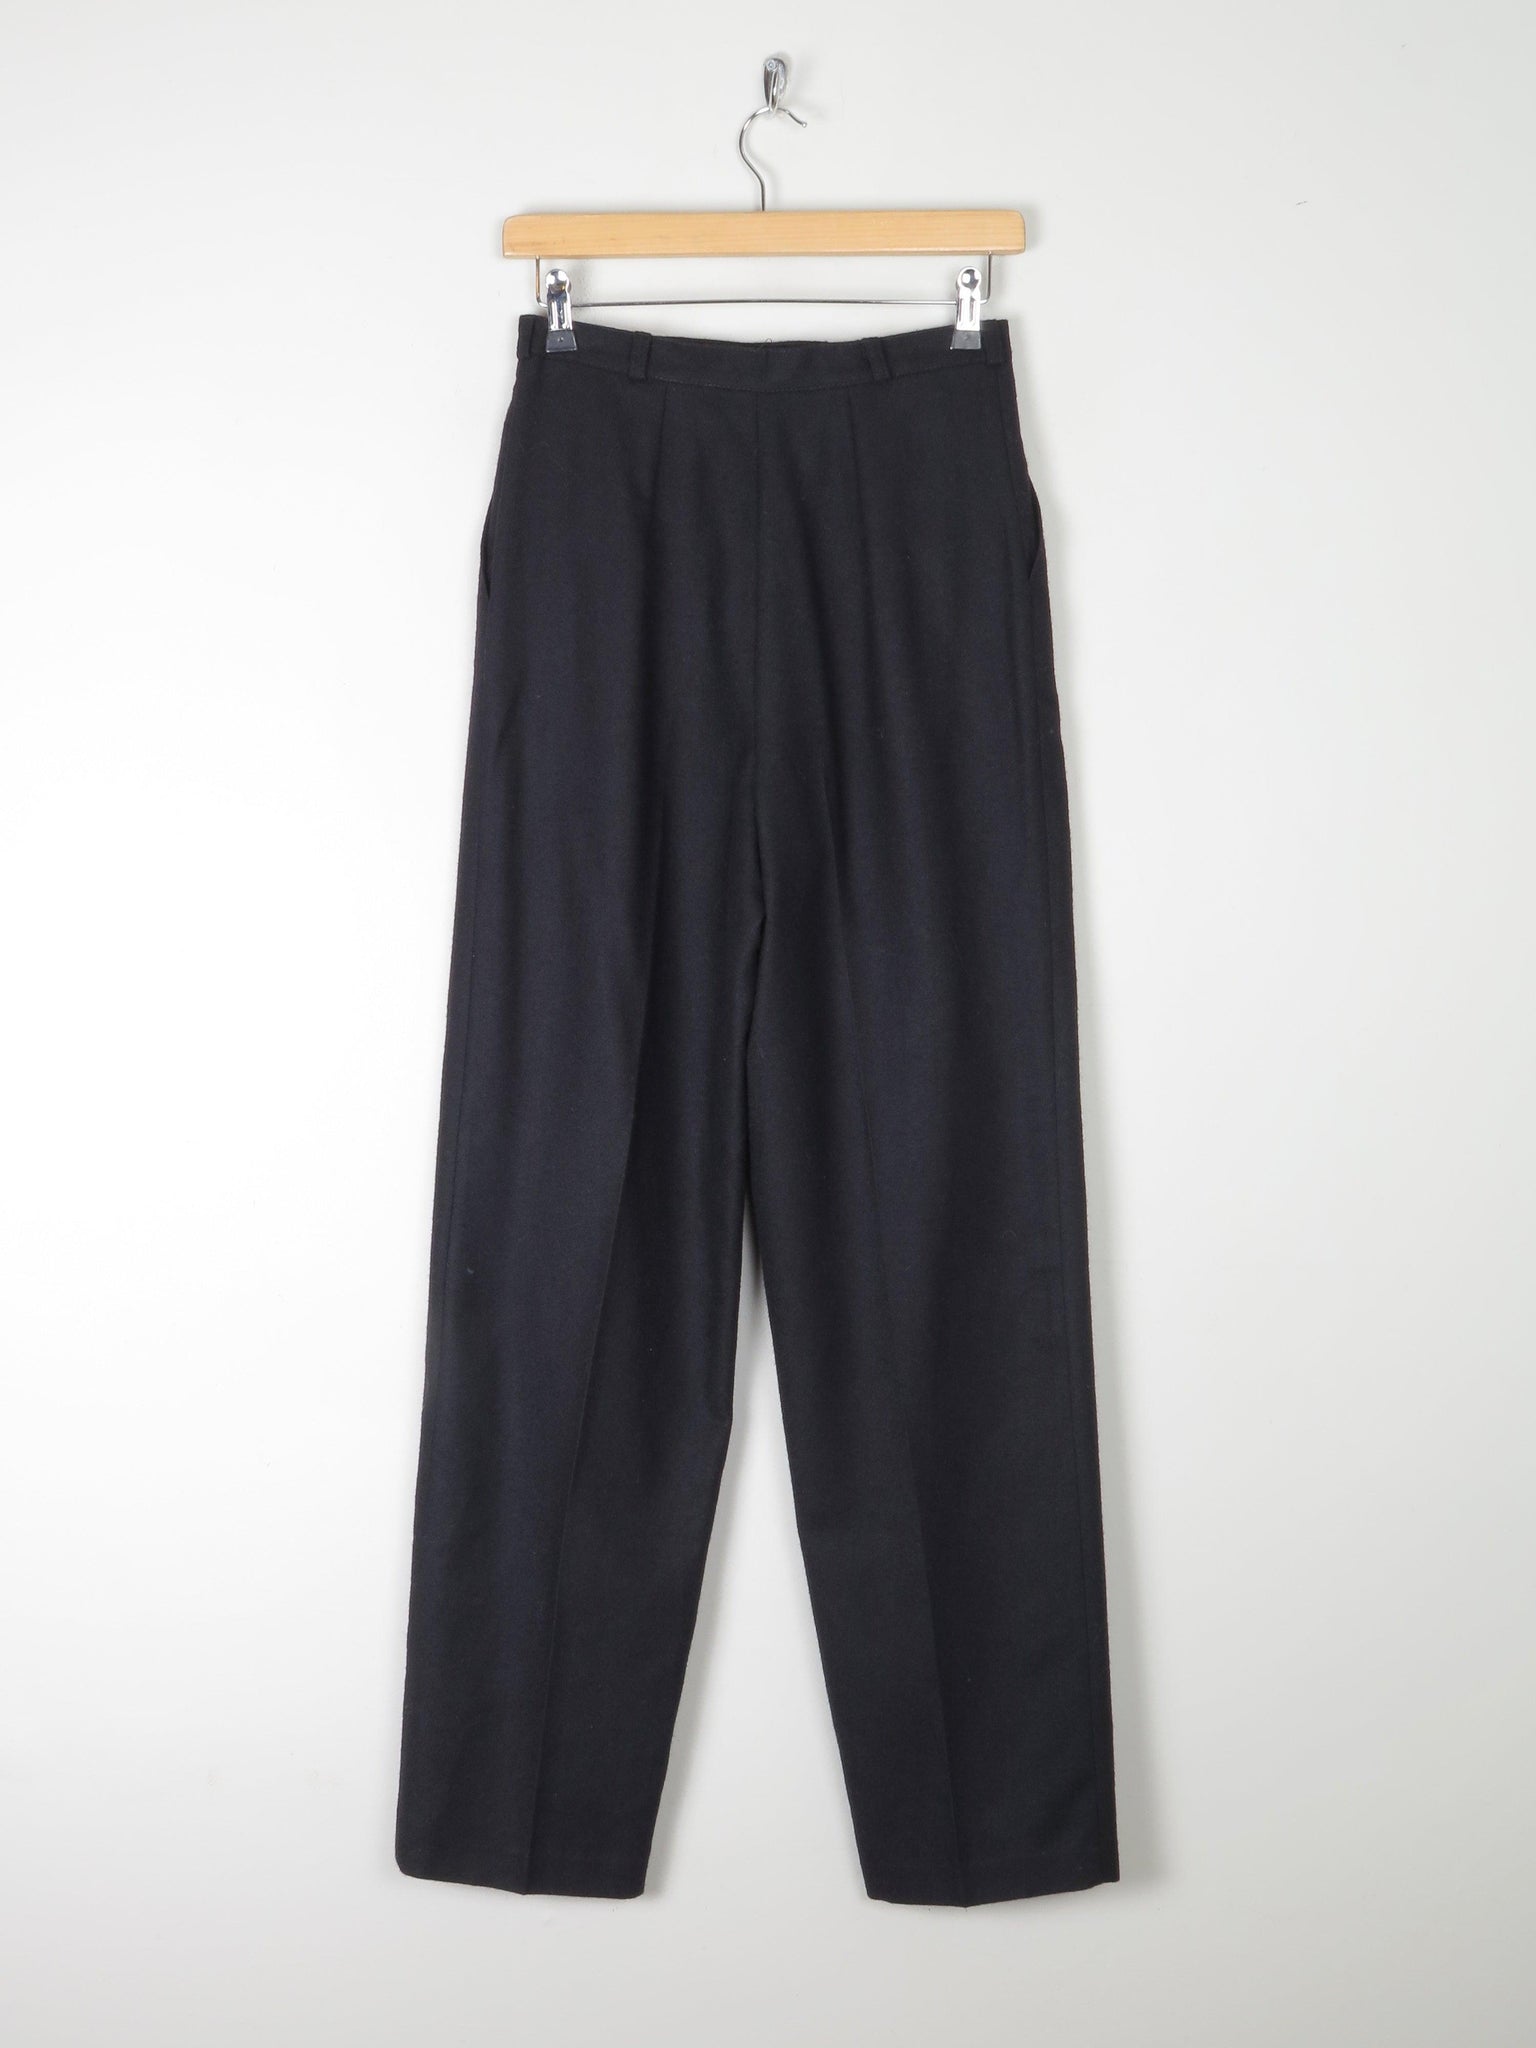 Women's Black Wool High Waisted Trousers  26" 8 Mona - The Harlequin